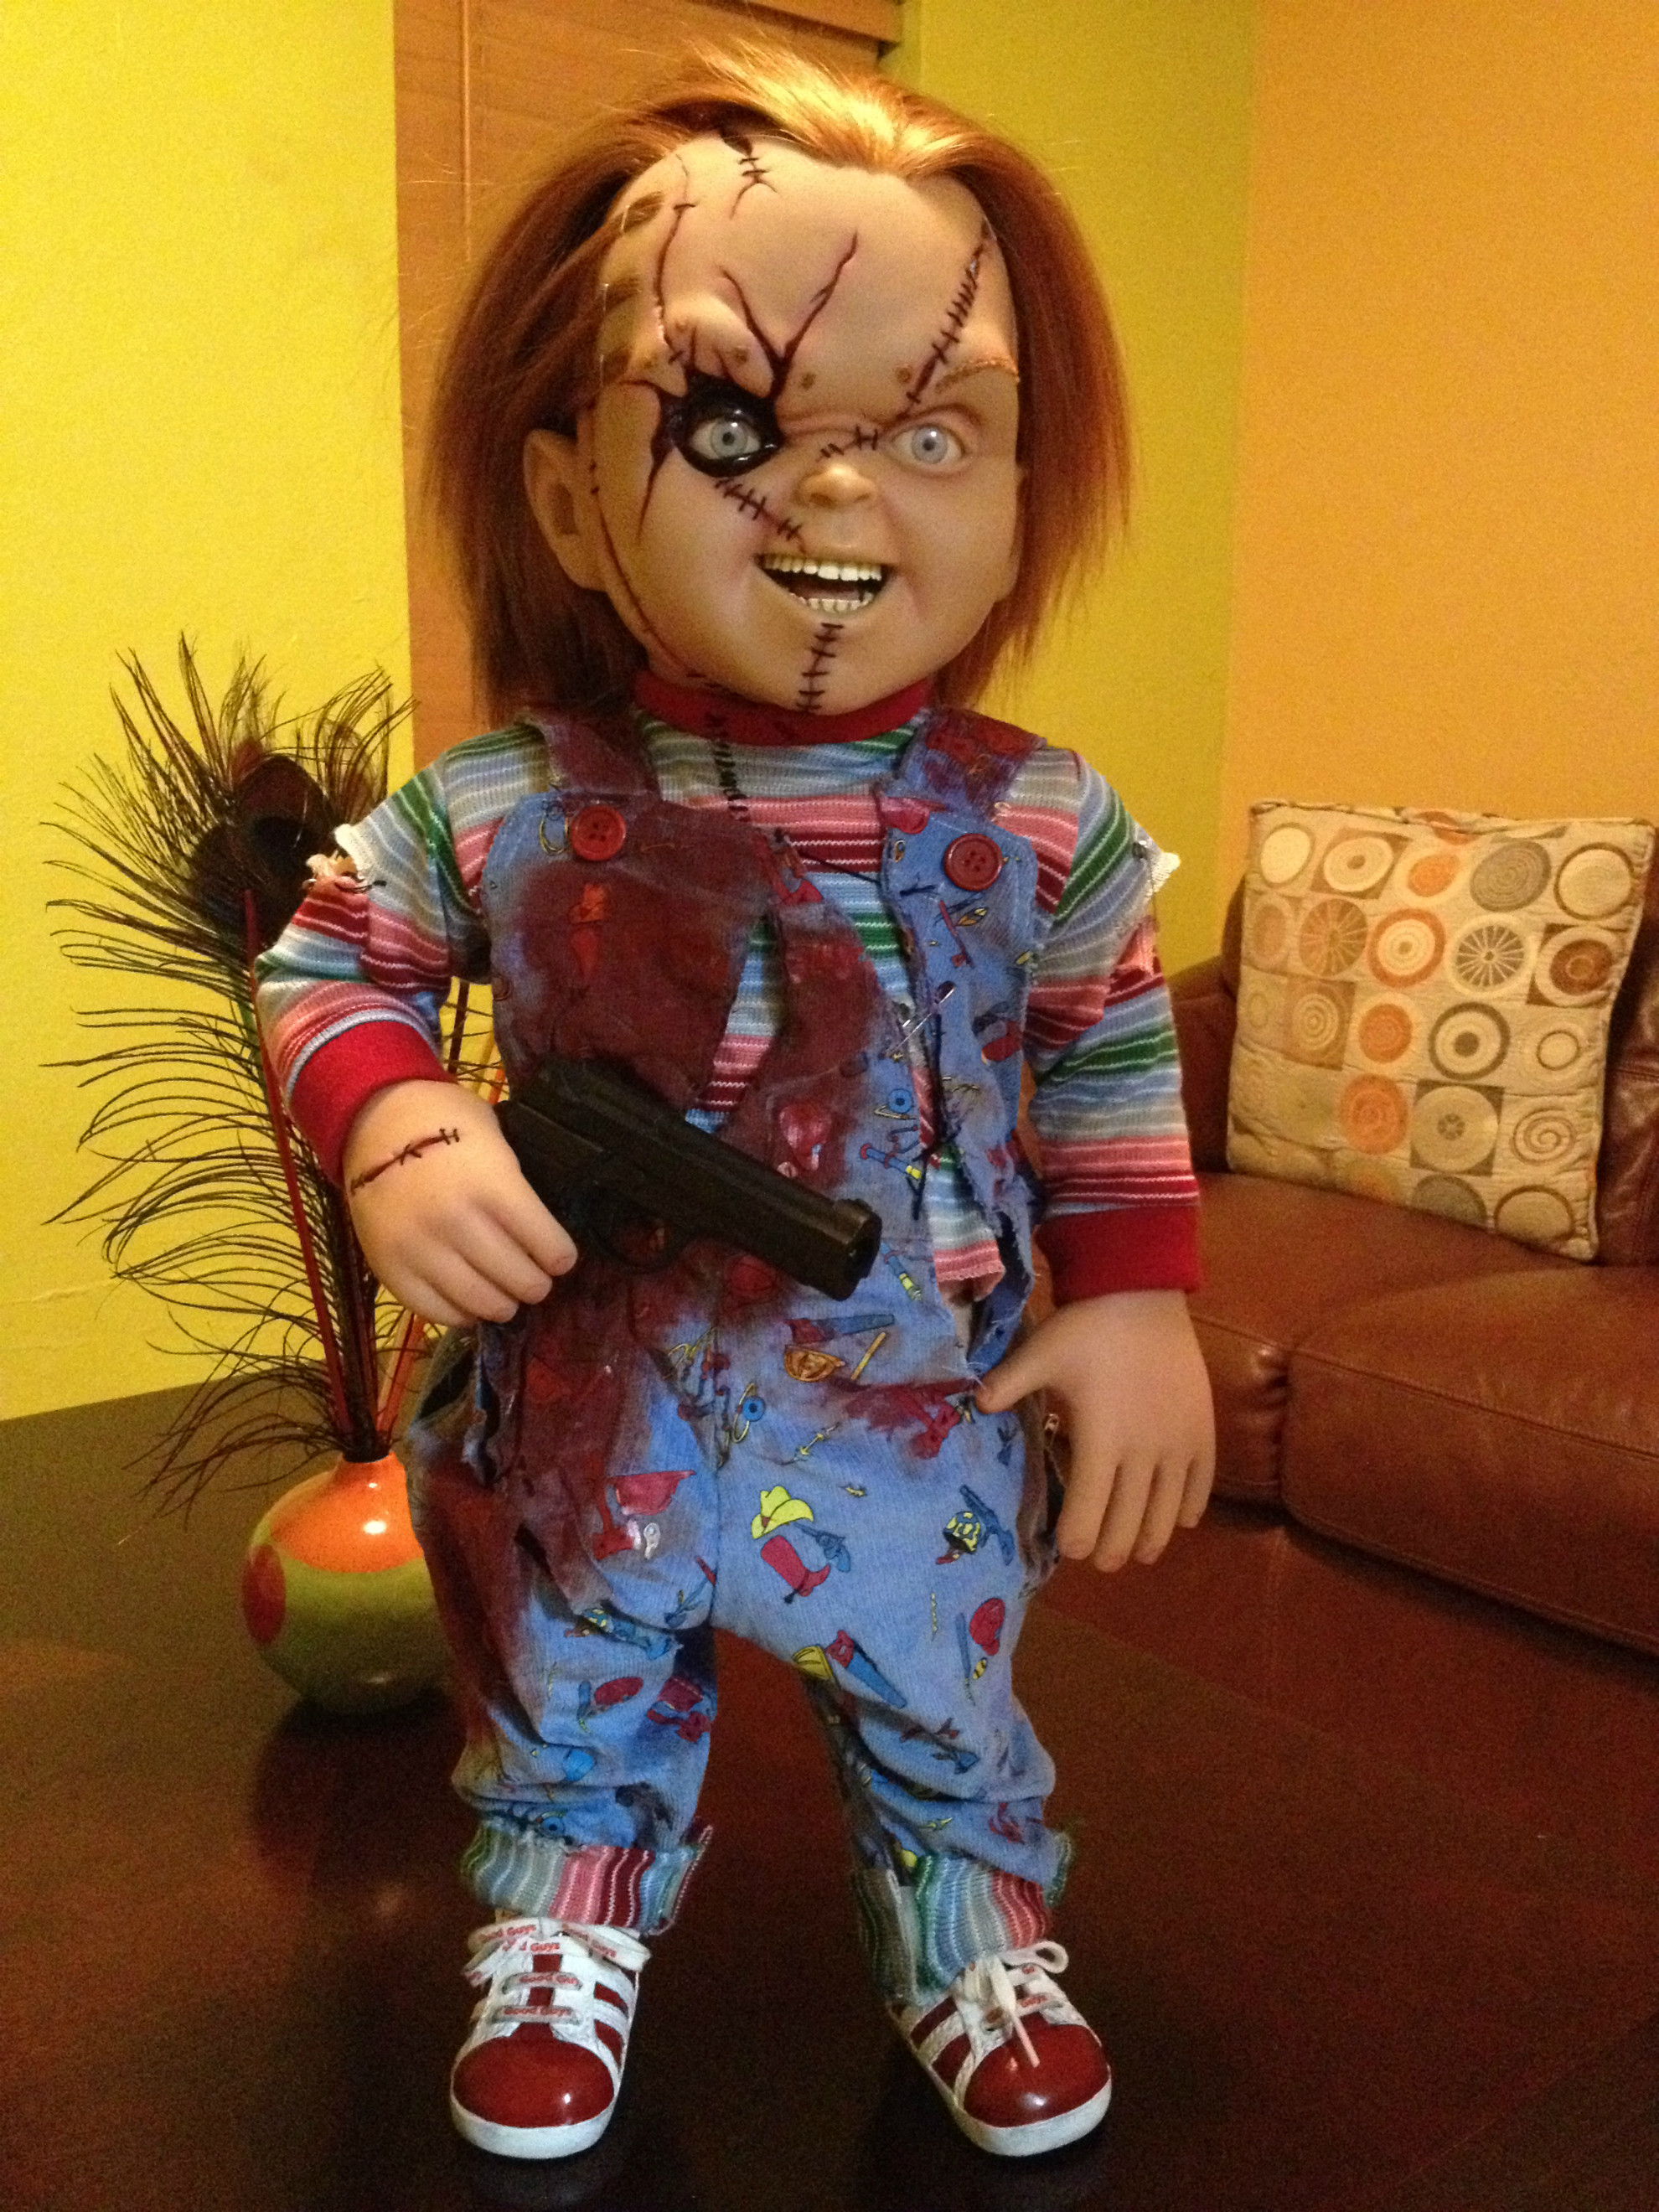 1980x2640 ... Chucky 1:1 by Sideshow Collectibles by jayrbermuda